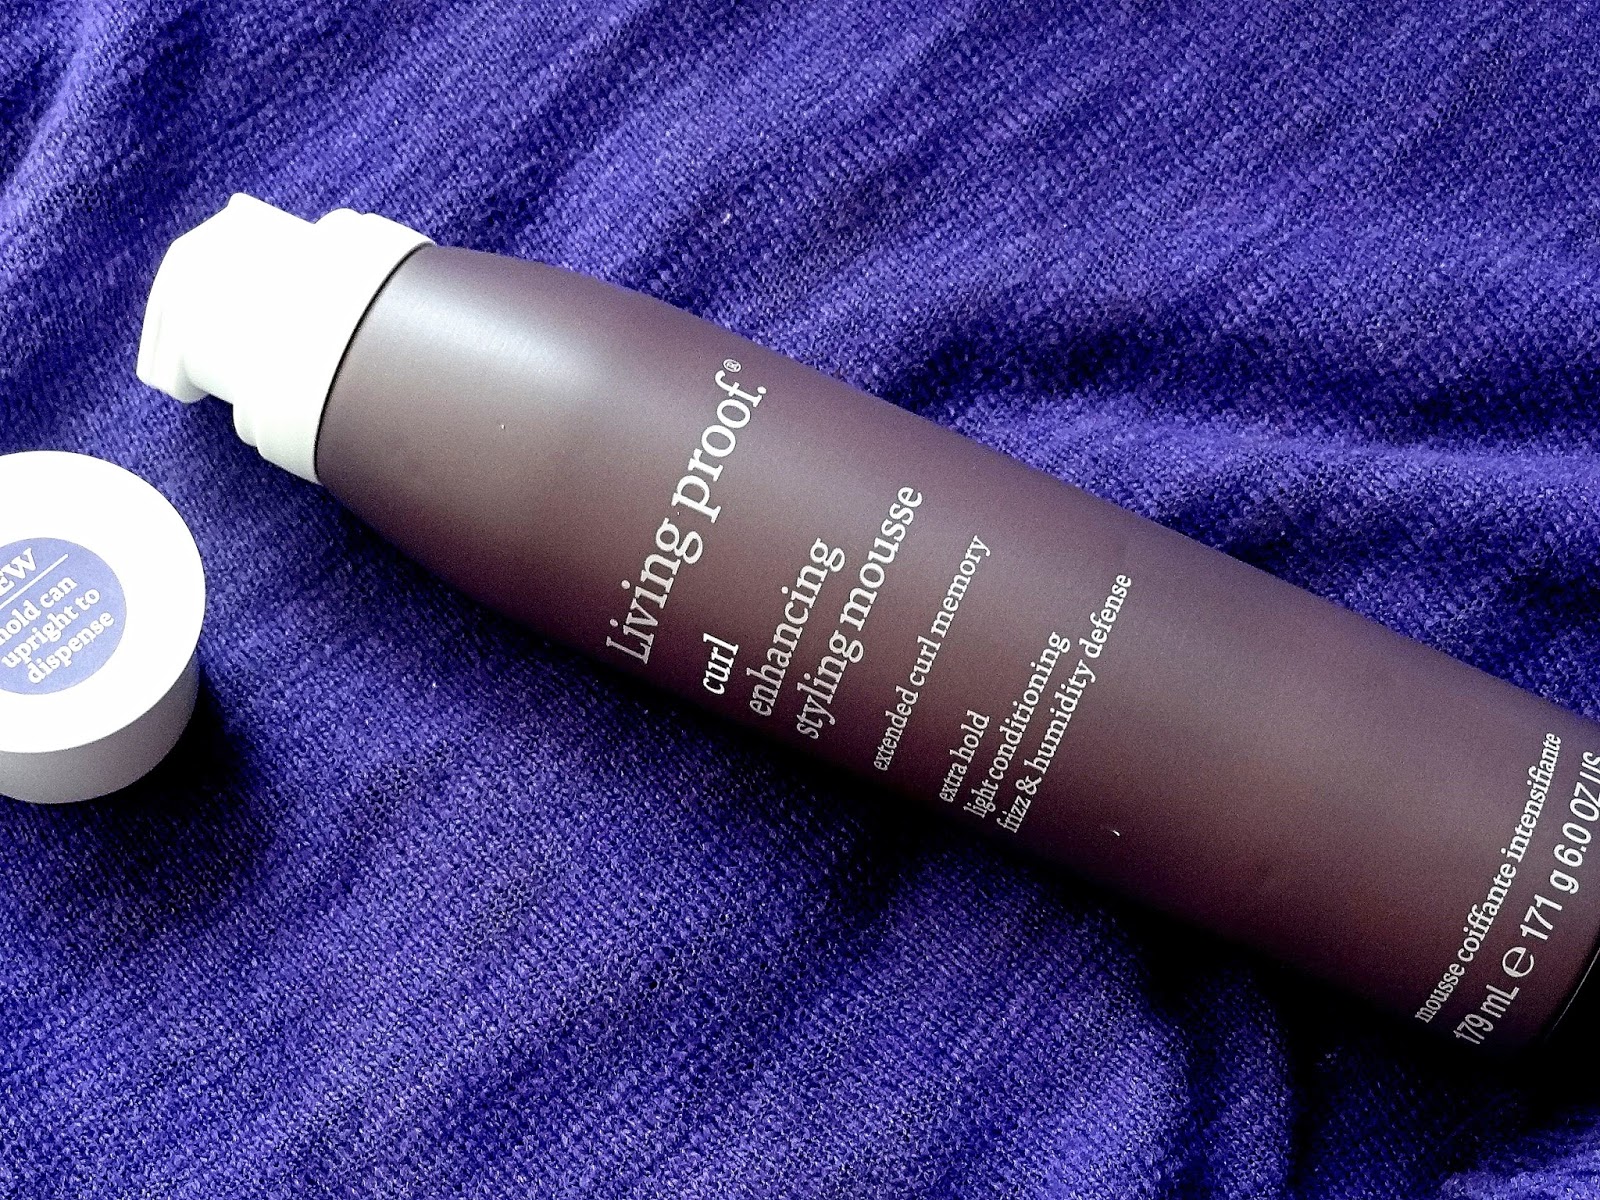 Living Proof Curl Enhancing Styling Mousse